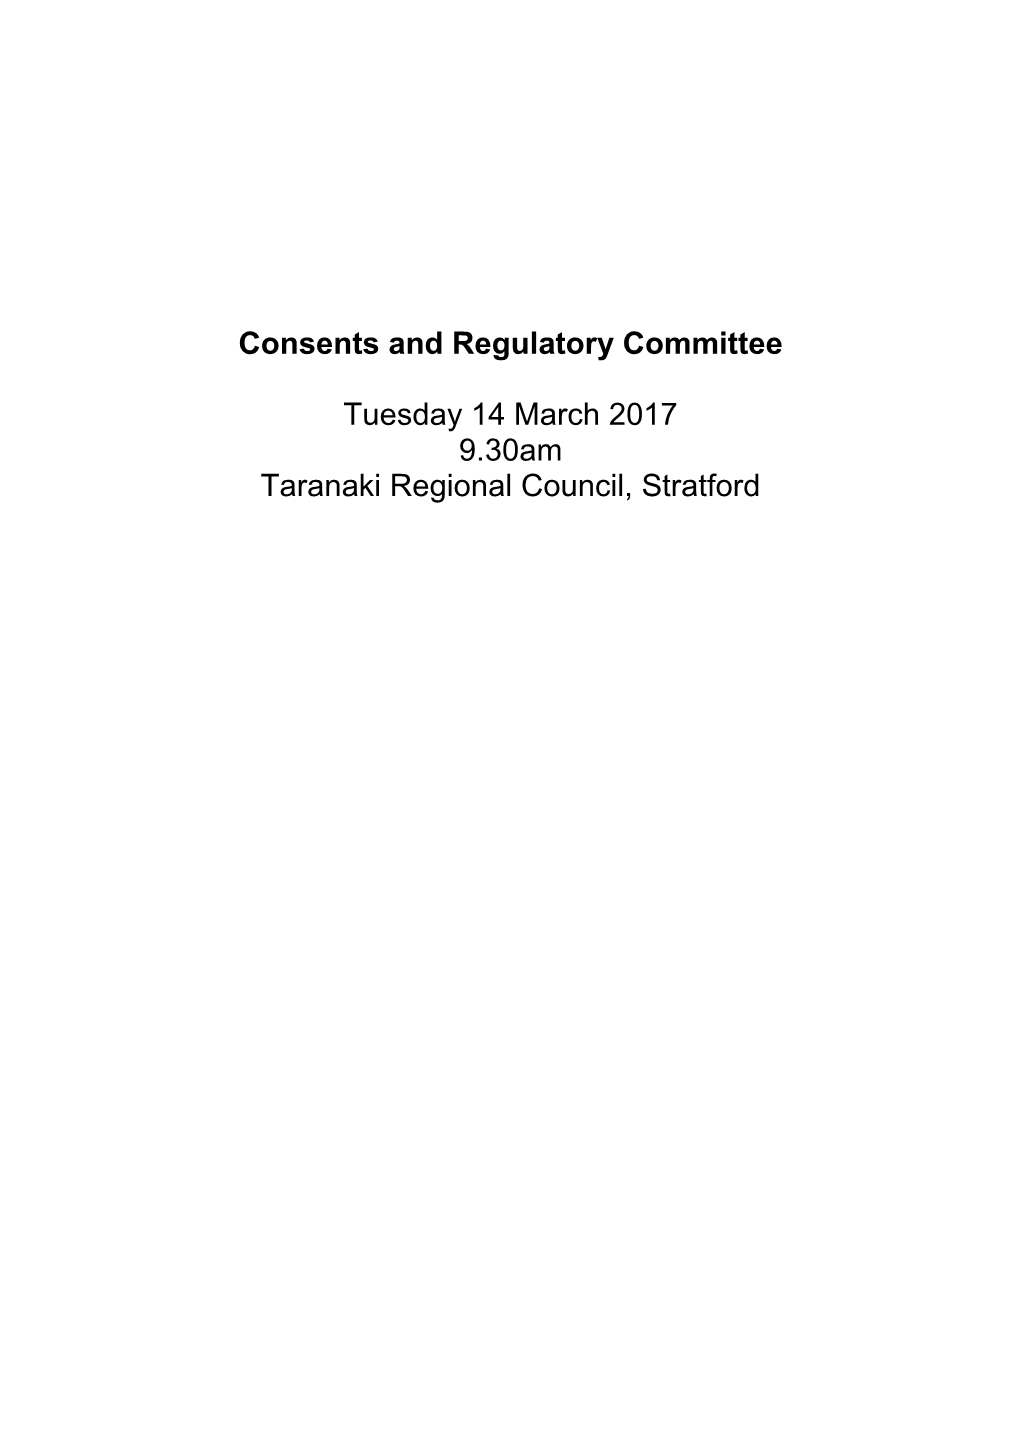 Consents and Regulatory Committee Tuesday 14 March 2017 9.30Am